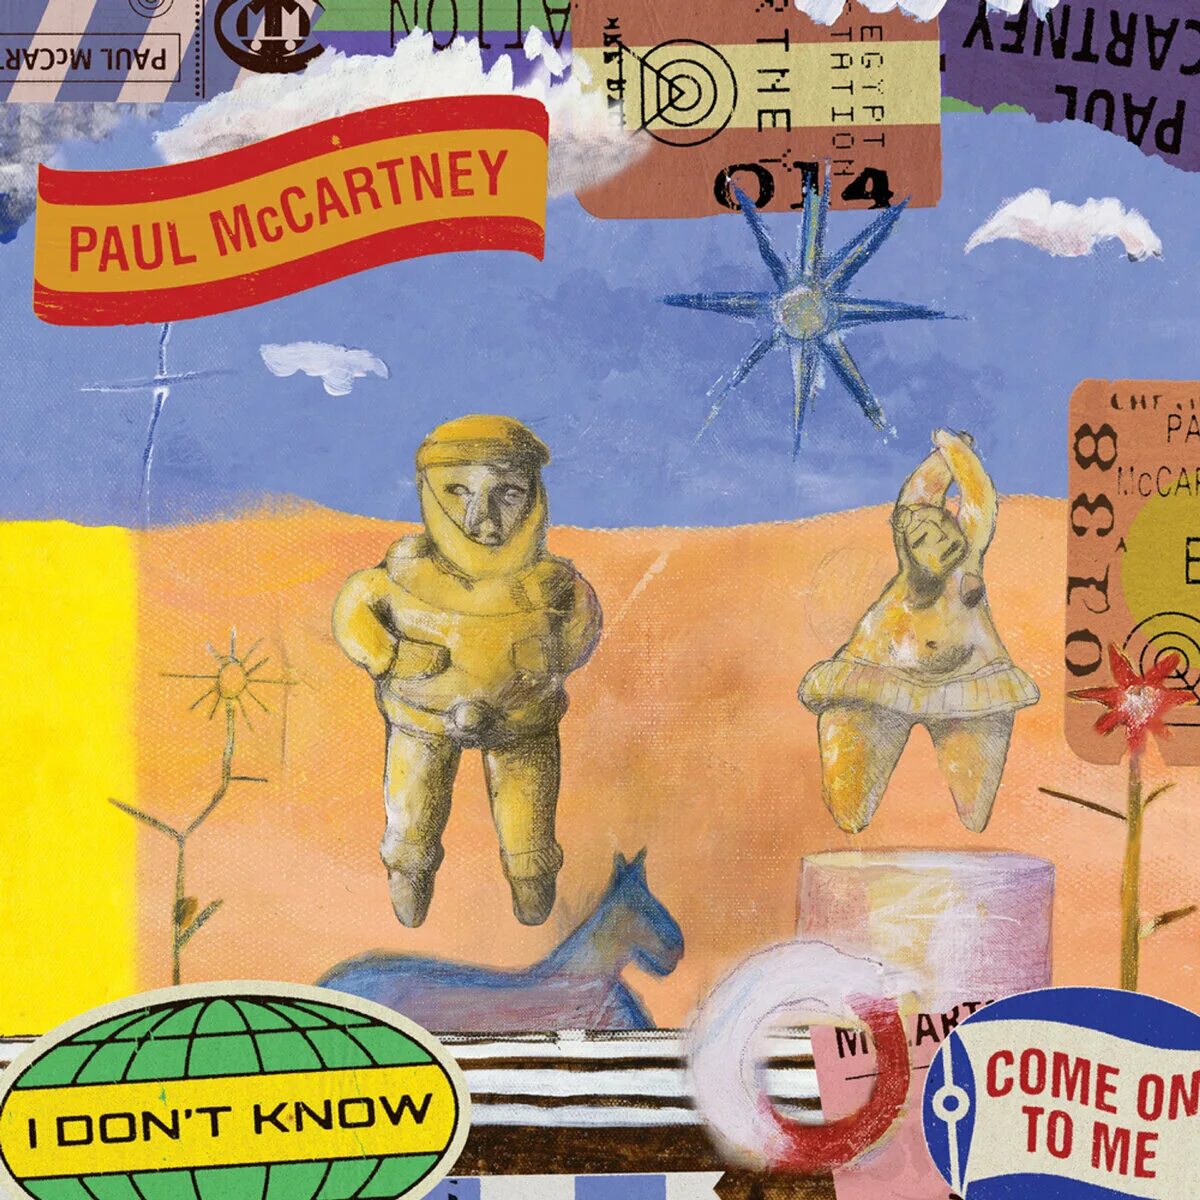 Paul first. Paul MCCARTNEY come on to me. Paul MCCARTNEY Egypt Station Cover CD. Обложка альбома Paul MCCARTNEY and Wings 2018 - Wings over Europe. Egypt Station don't know.